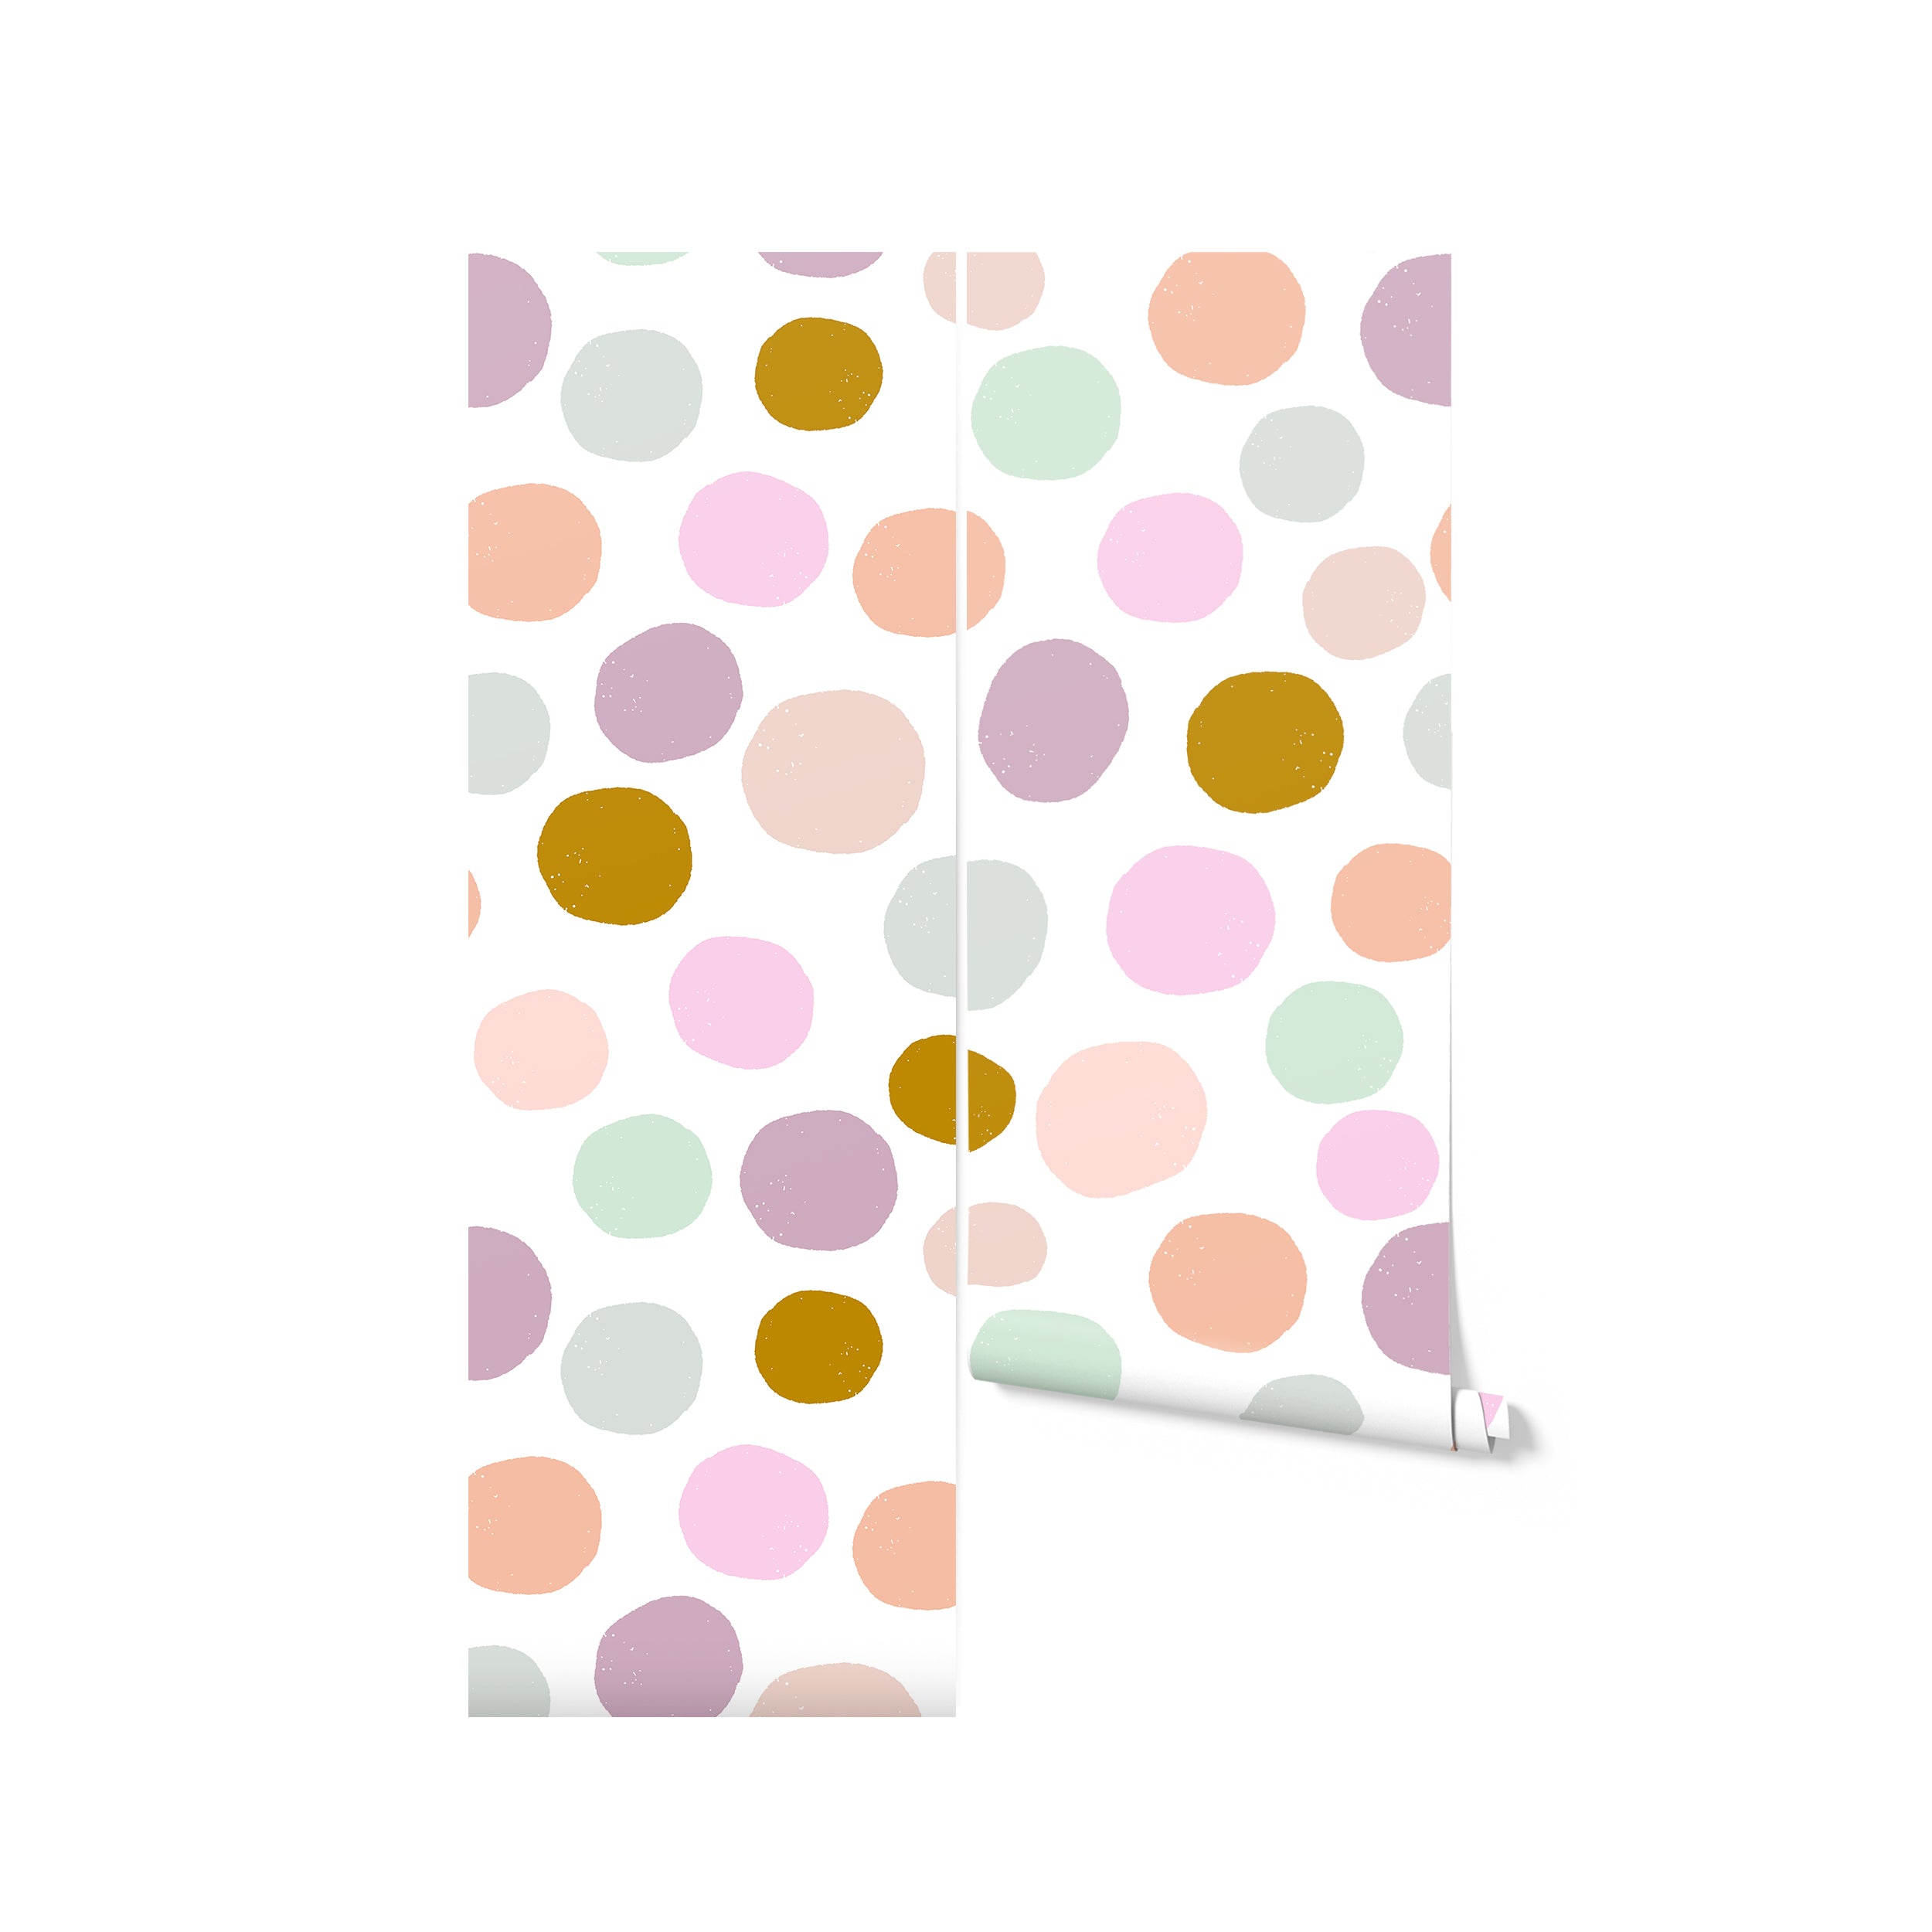 Roll of playful children's wallpaper showcasing a variety of large pastel polka dots on a white background, creating a fun and inviting atmosphere for nurseries or playrooms.